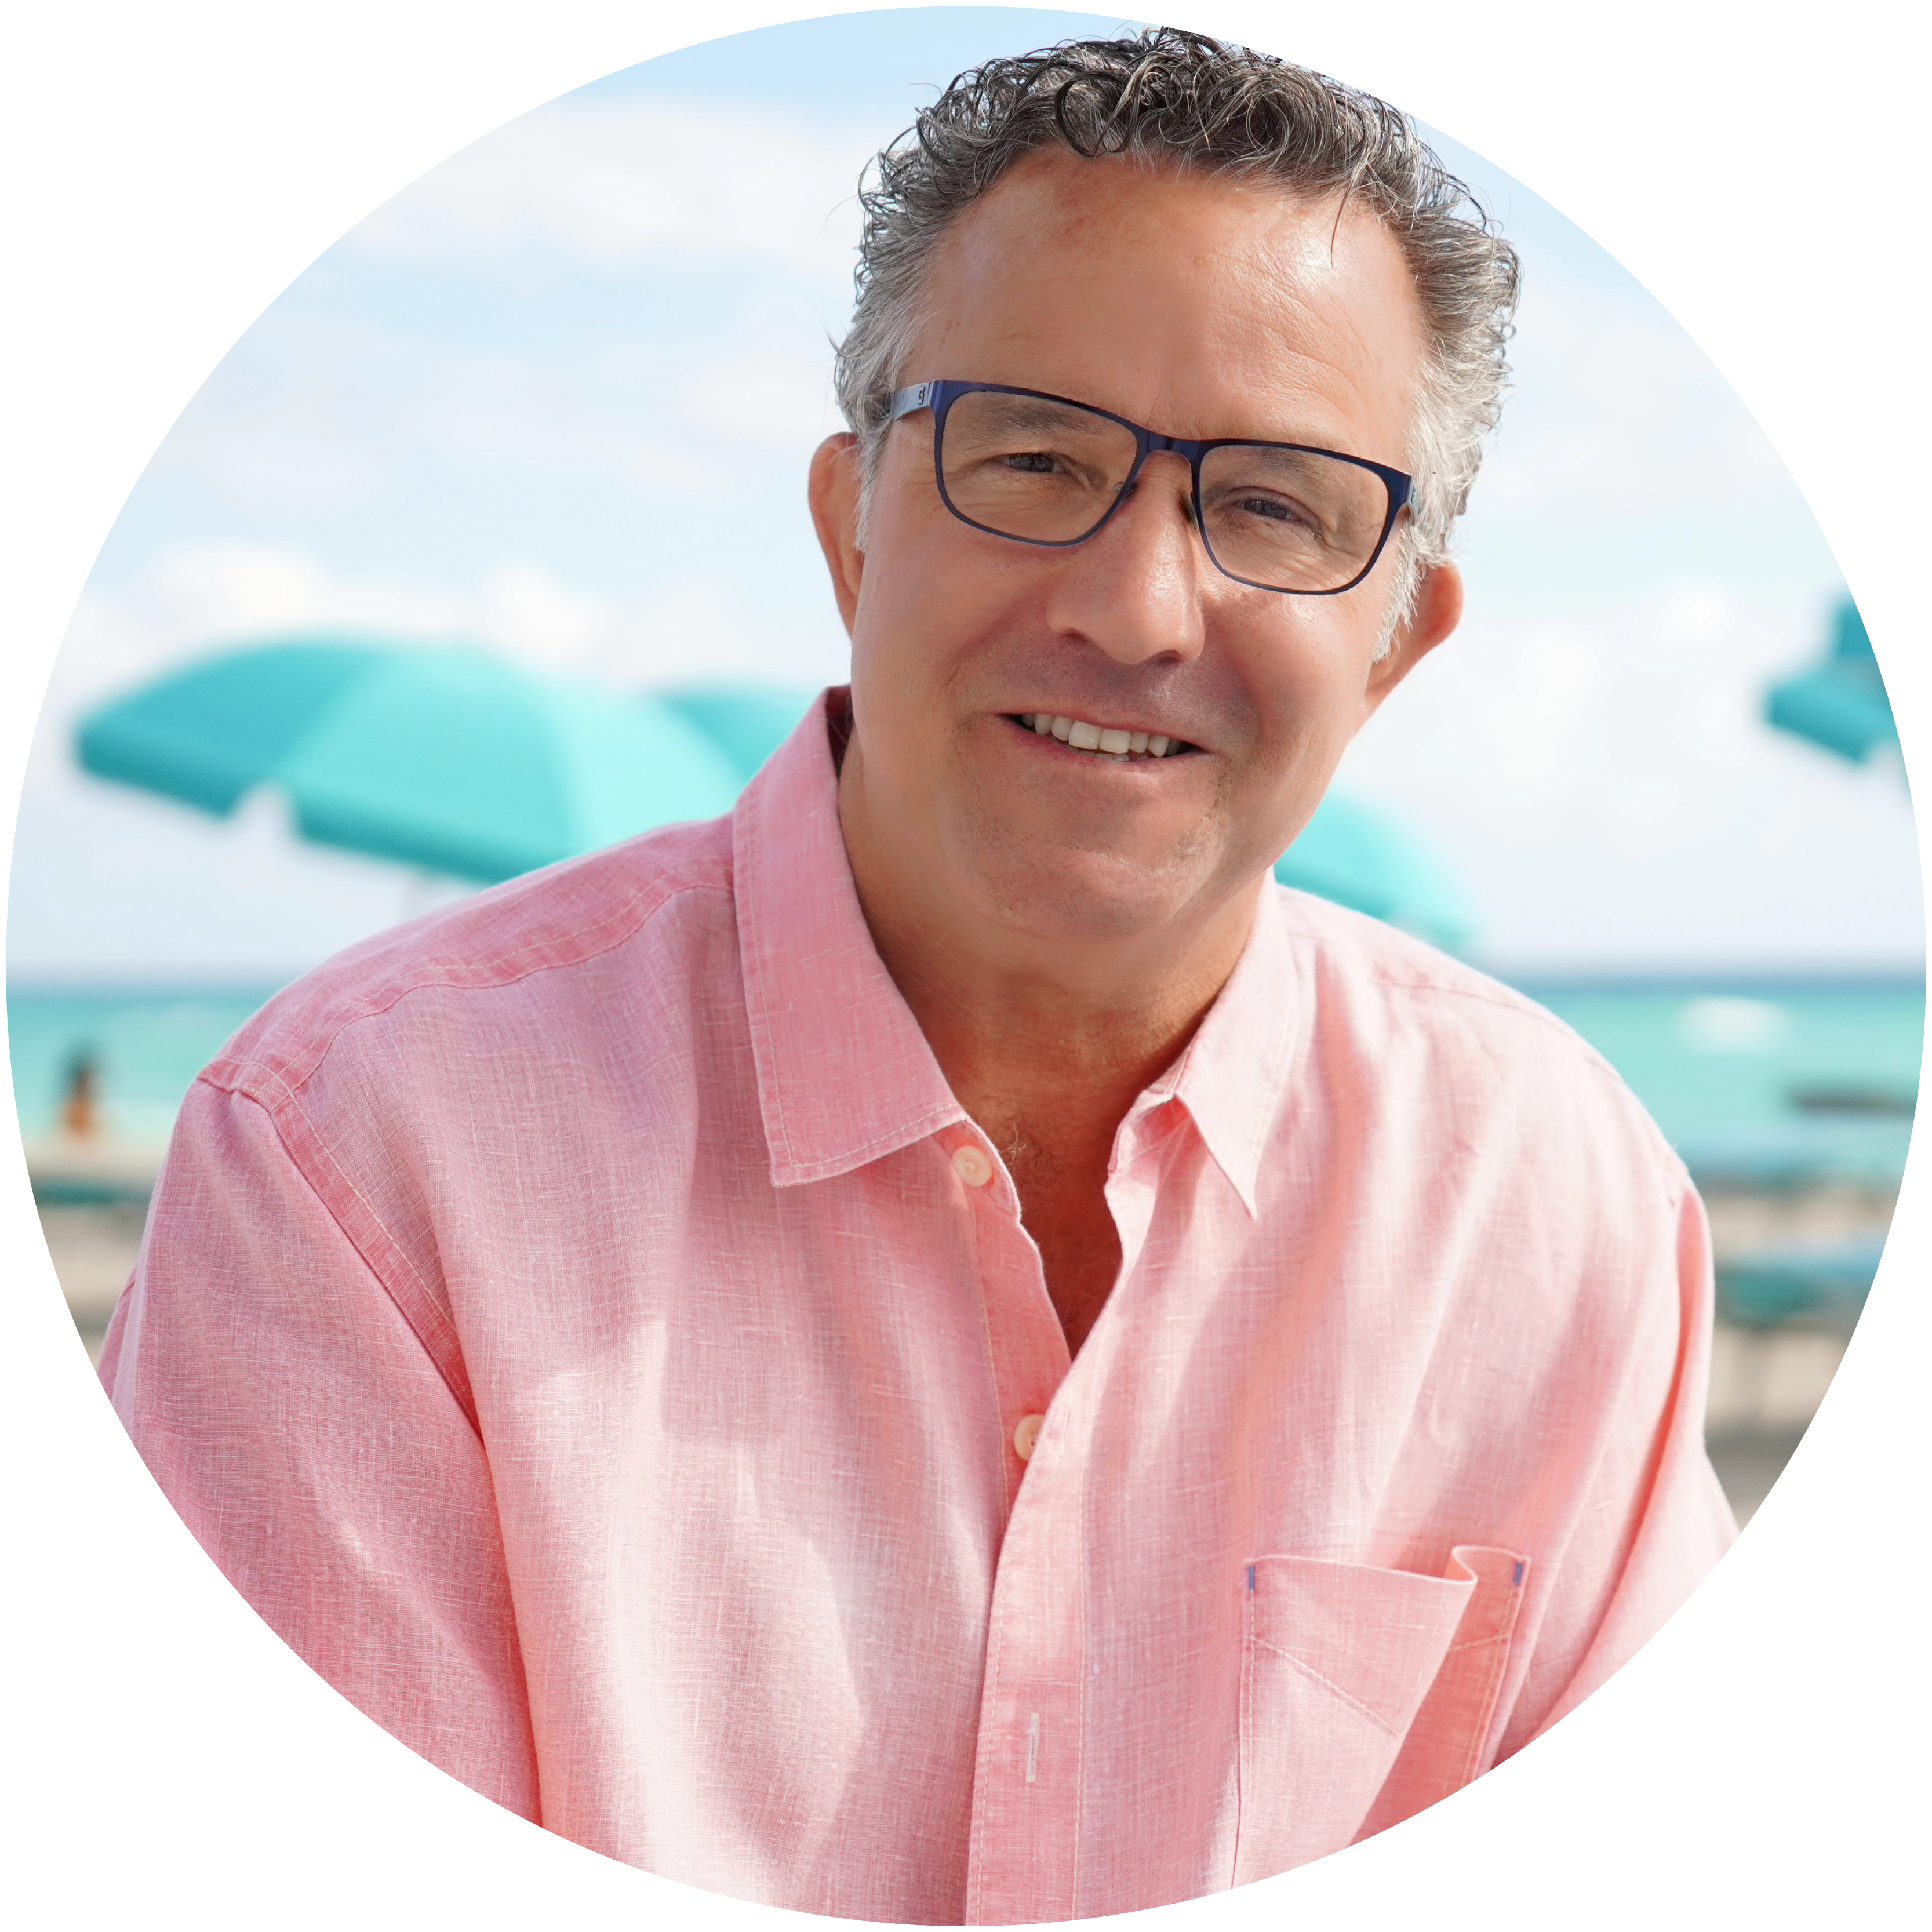 Andrew Houghton, a white male with short grey hair and glasses wears a pink collared shirt against a beach background.